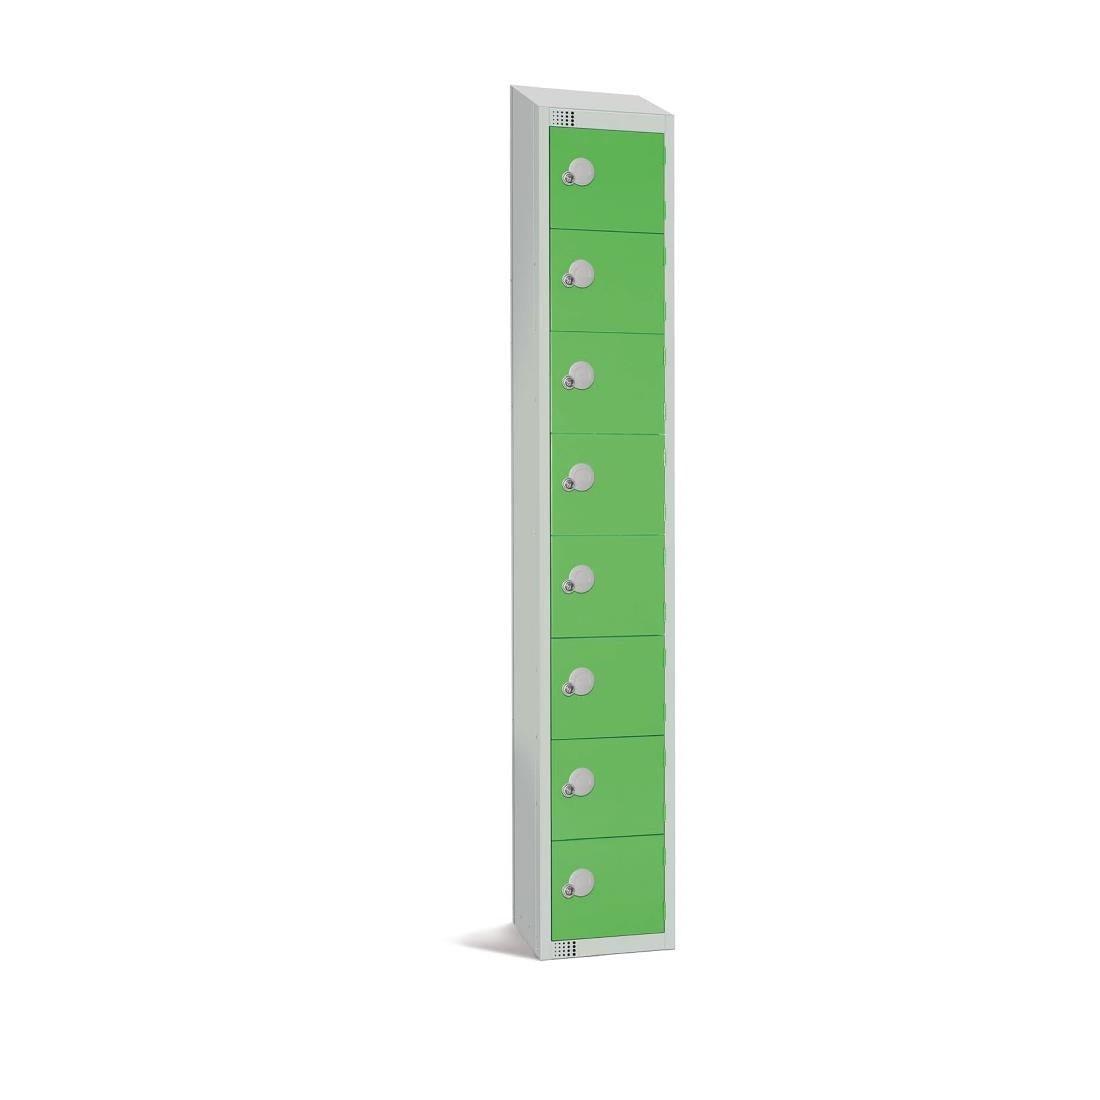 CE109-CNS Elite Eight Door Coin Return Locker with Sloping Top Green JD Catering Equipment Solutions Ltd